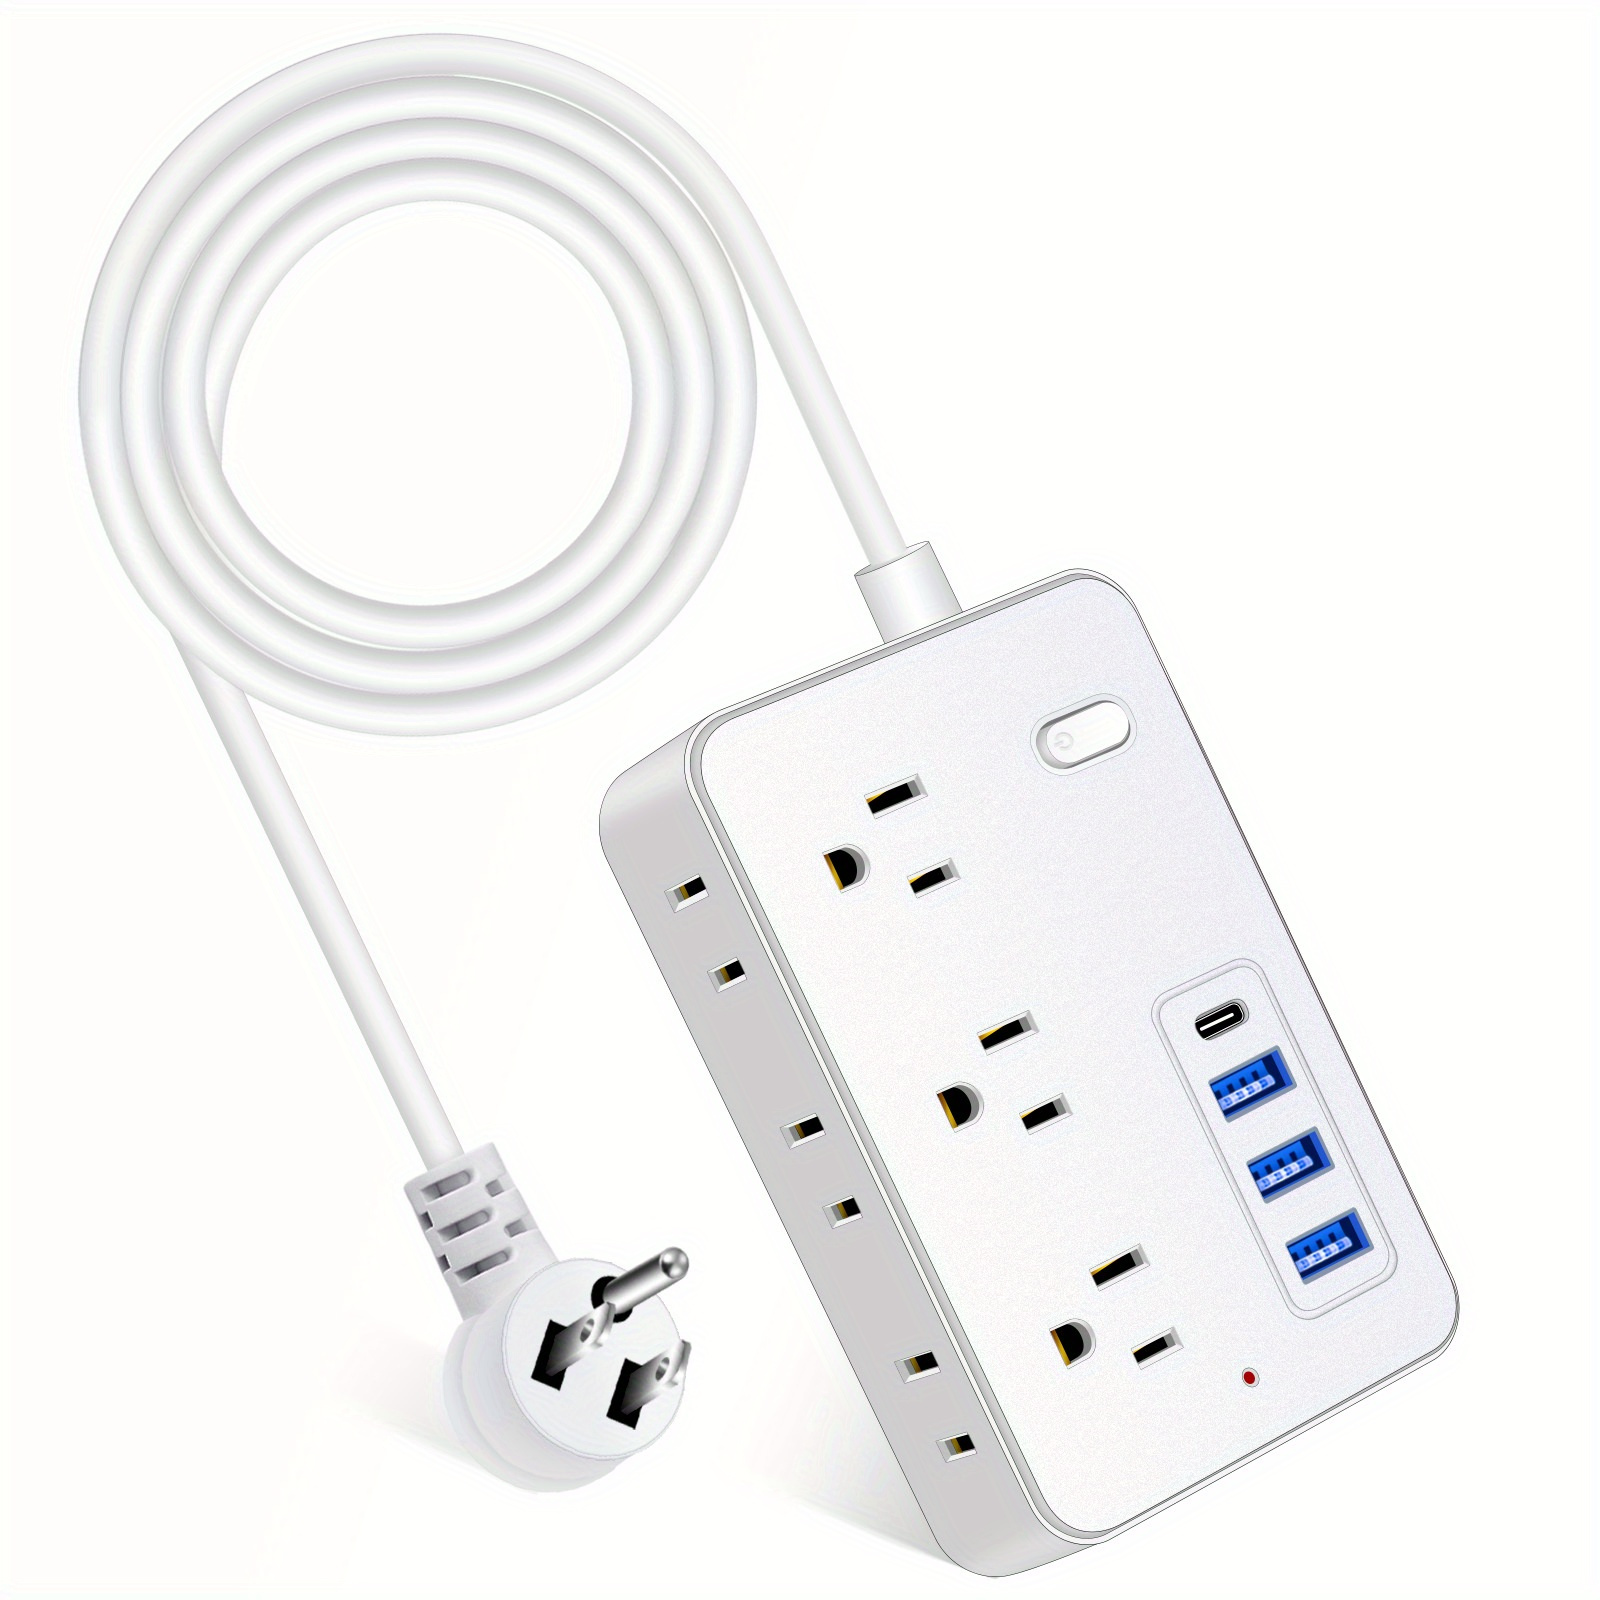 

1pc Desktop Machine Power Strip, With 6 Outlets And 3 Usb Ports, Flat Plug And 3.9 Inches Long Extension Cord, For Cruise Ship Travel Home Office, Ul Listed, Us Standard